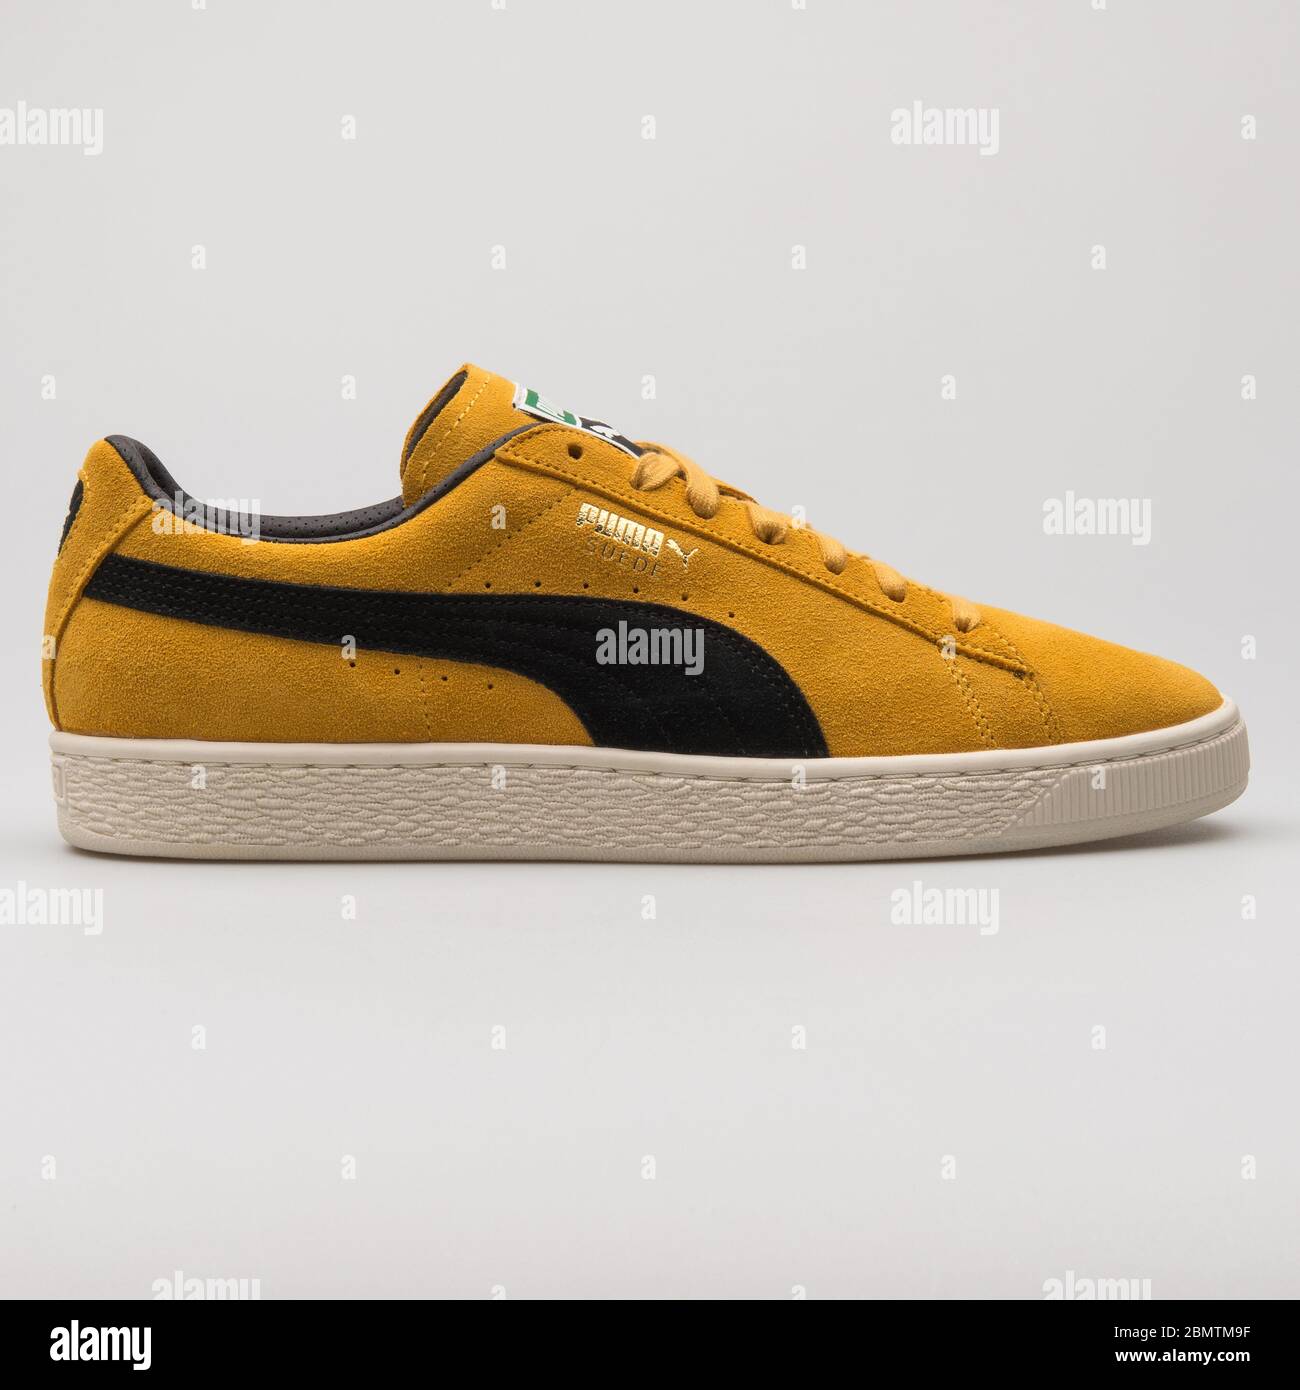 VIENNA, AUSTRIA - FEBRUARY 19, 2018: Puma Suede Archive yellow and black sneaker on white background Stock Photo - Alamy